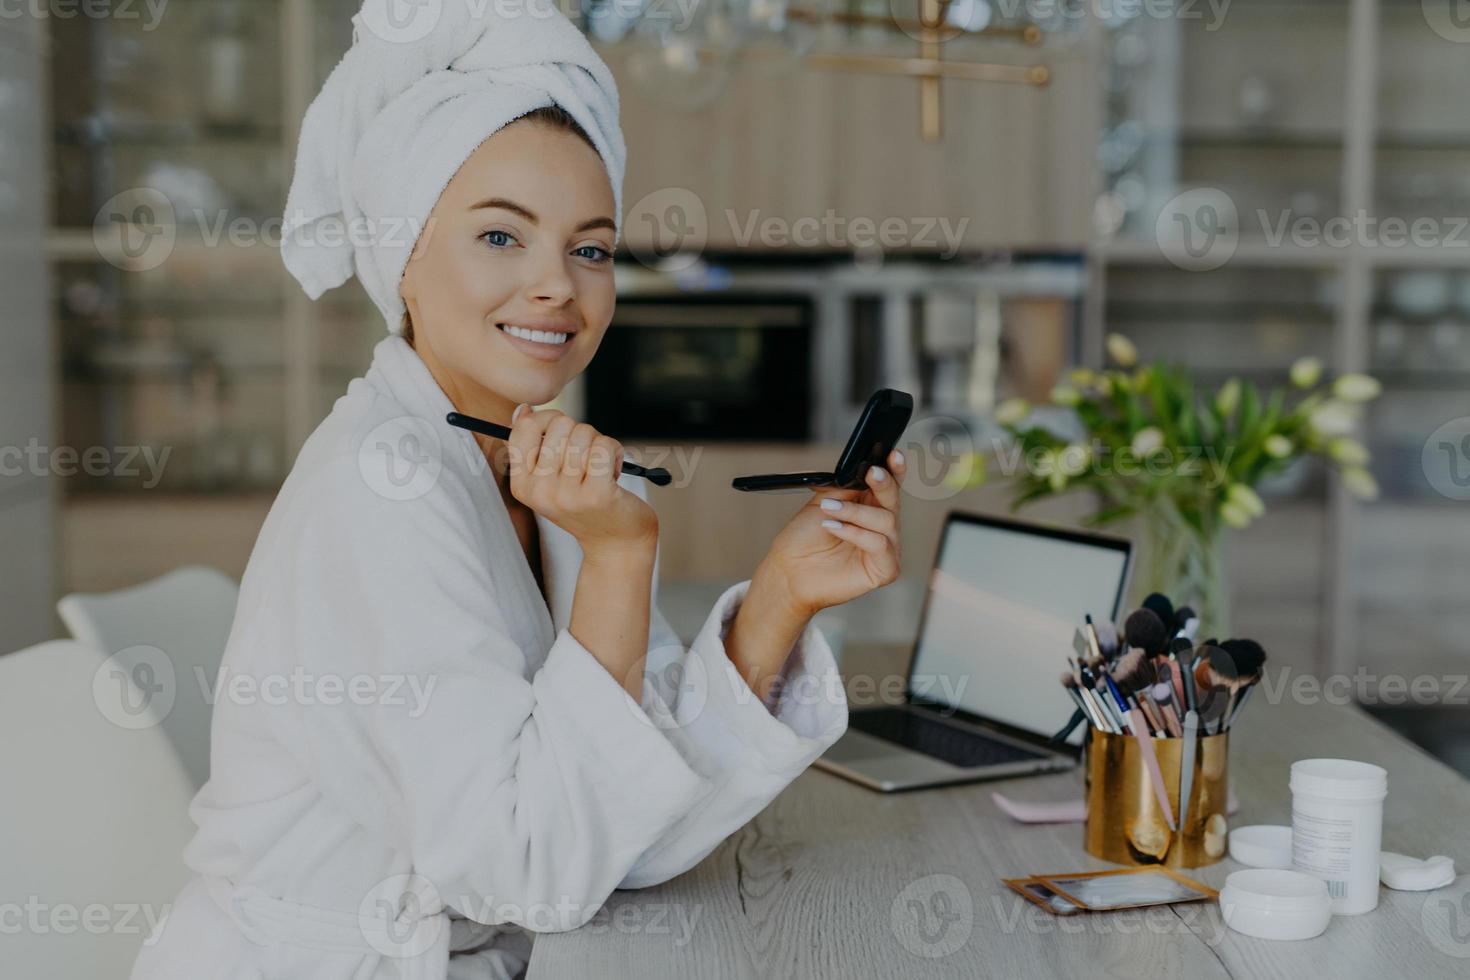 Tender lovely woman with healthy skin holds small mirror and cosmetic brush applies powder on face smiles toothily wears soft white bathrobe and towel poses against home interior. Beauty concept photo